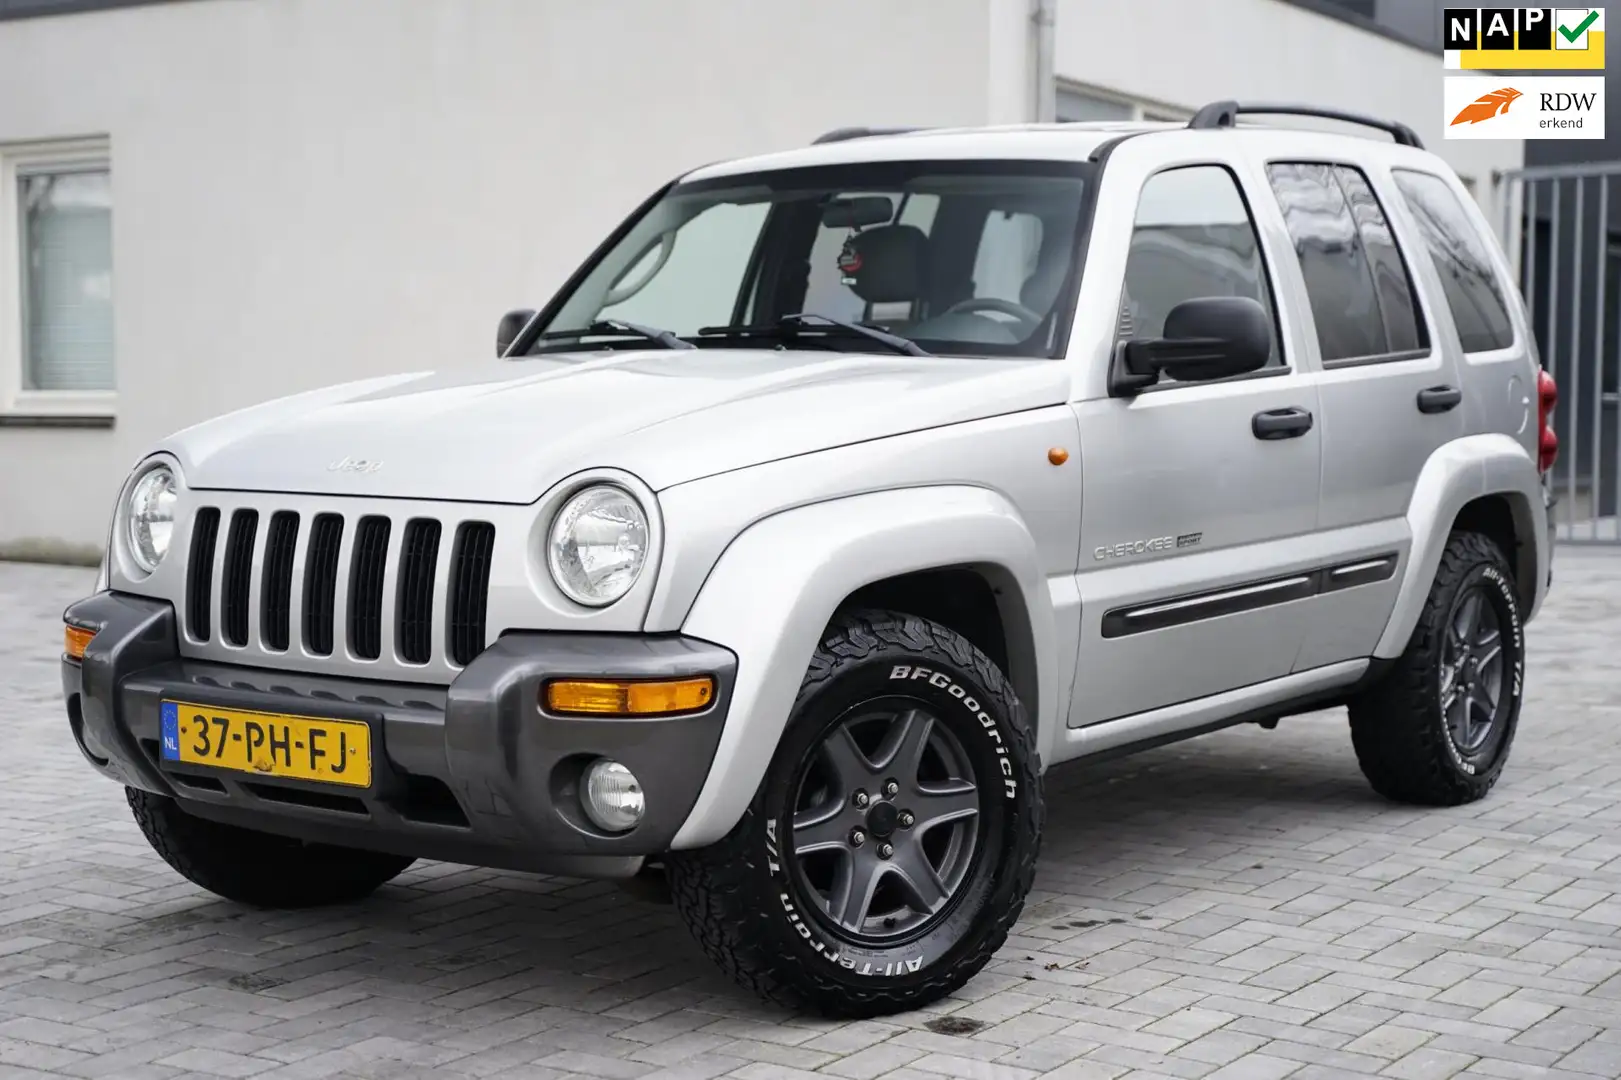 Jeep Cherokee 3.7i V6 Extreme Sport LPG G3 Automaat 4x4, NAP Gris - 1